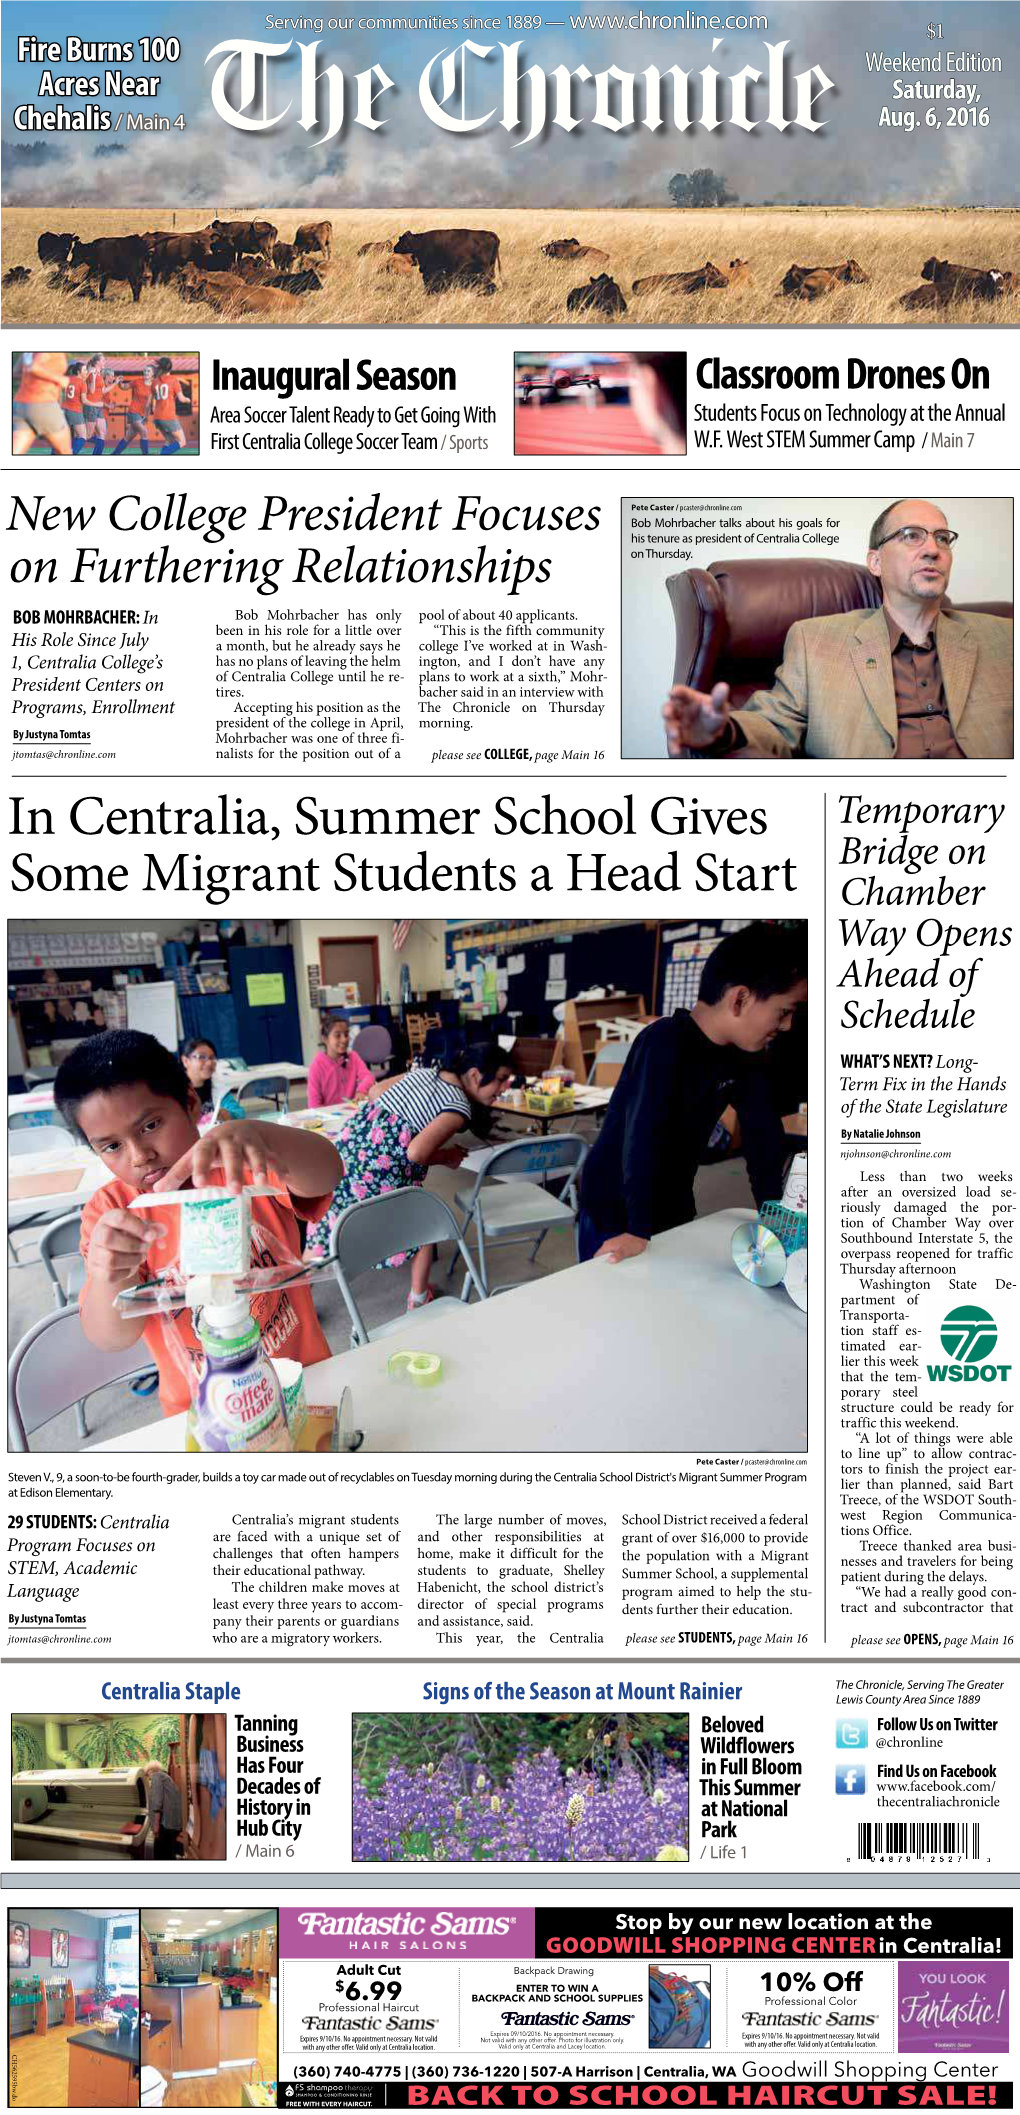 In Centralia, Summer School Gives Some Migrant Students a Head Start